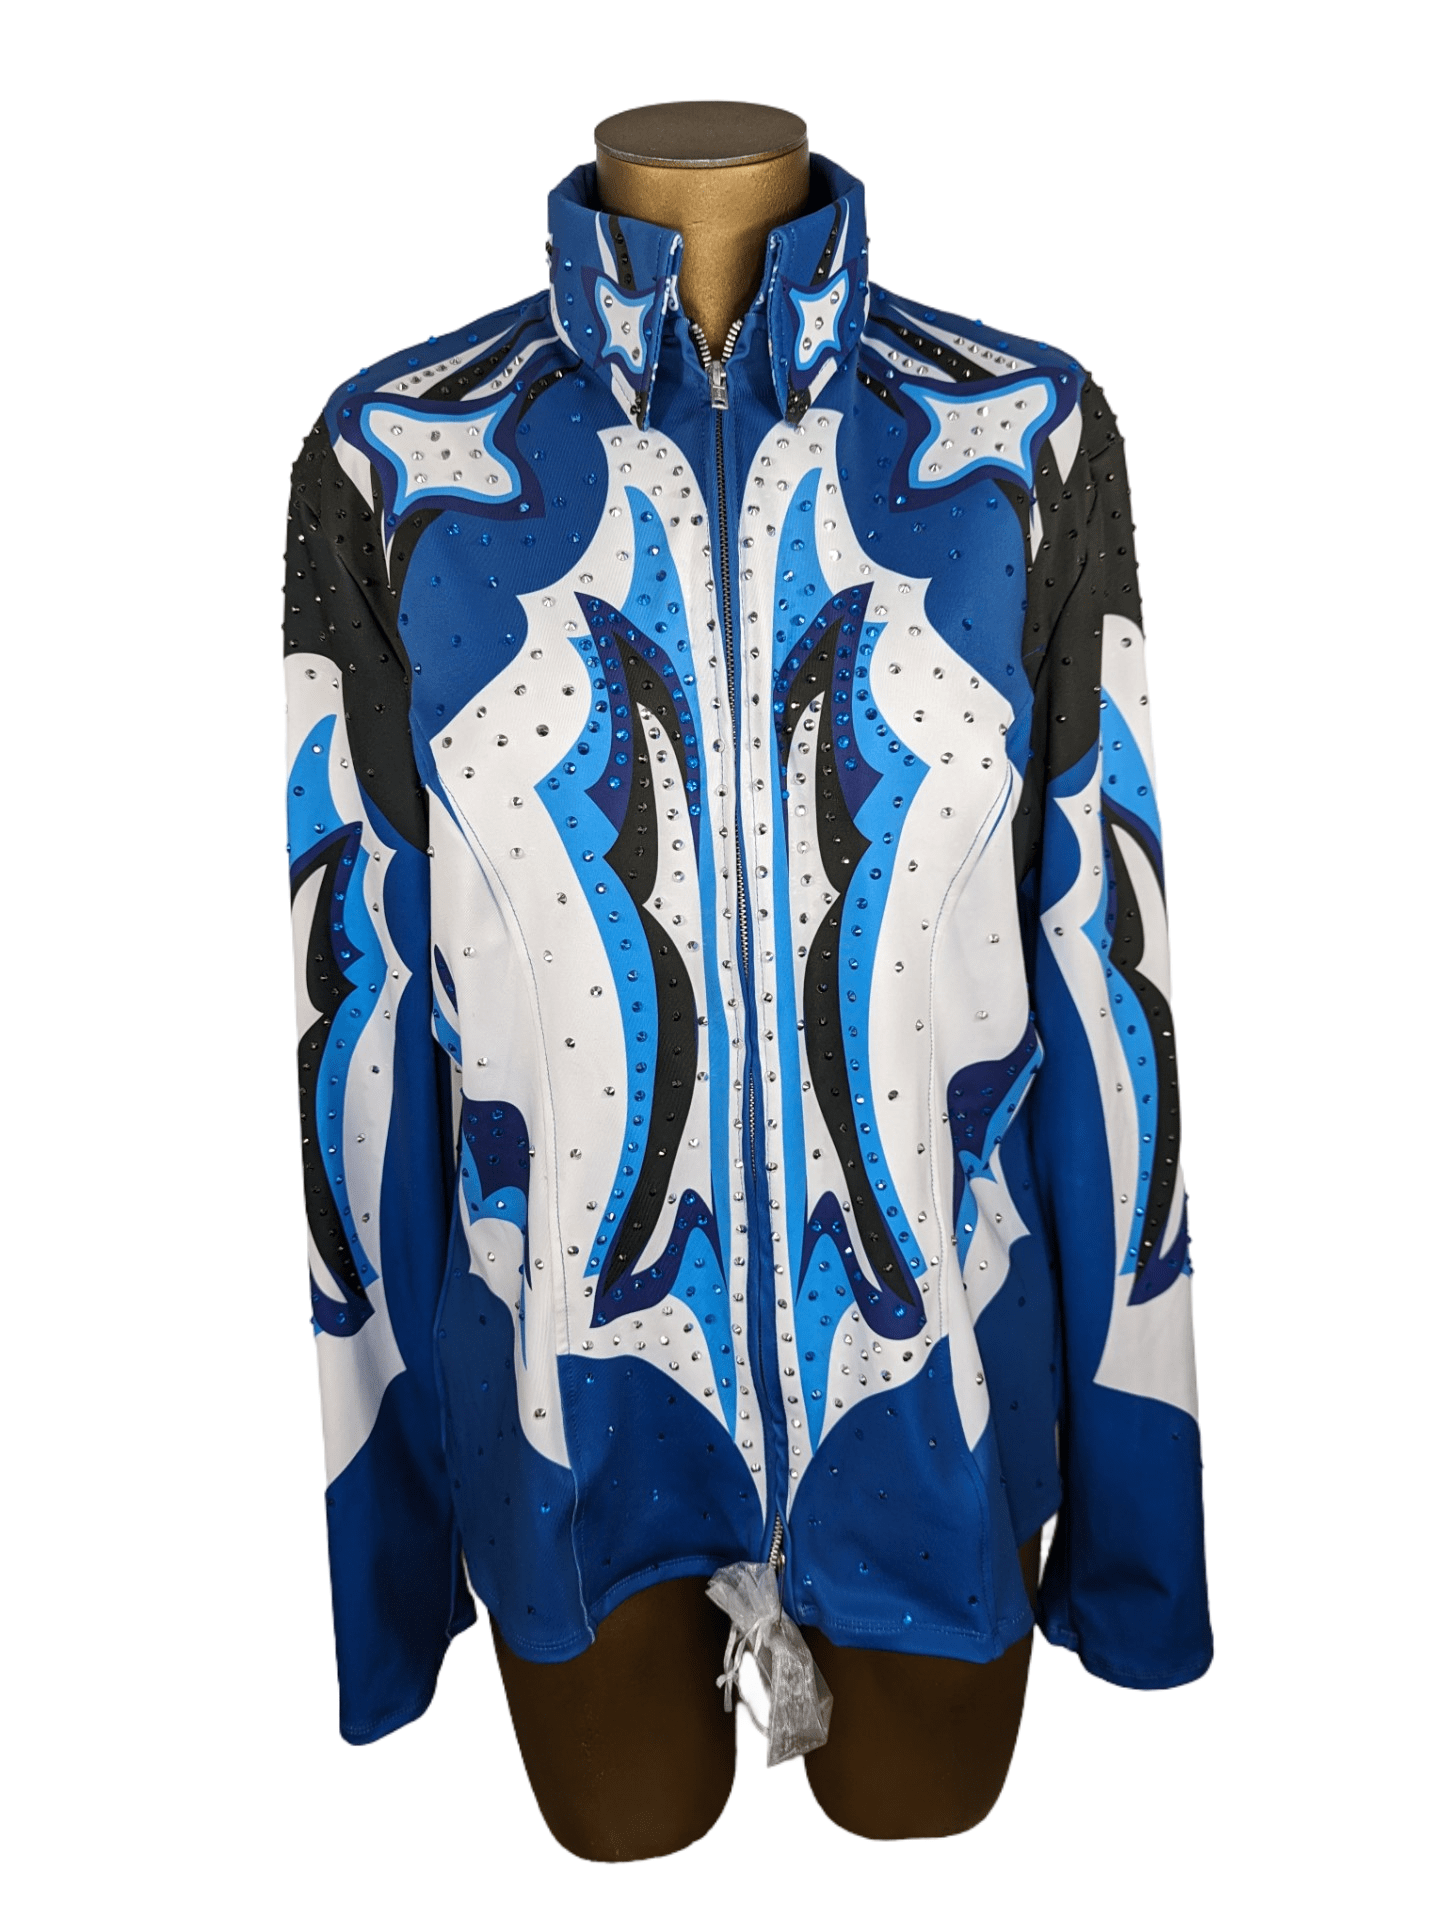 sparkle-ridge-western-show-shirts-womens-rodeo-shirts-barrel-racing-shirts-horse-show-jacket-icy-blue-front.png